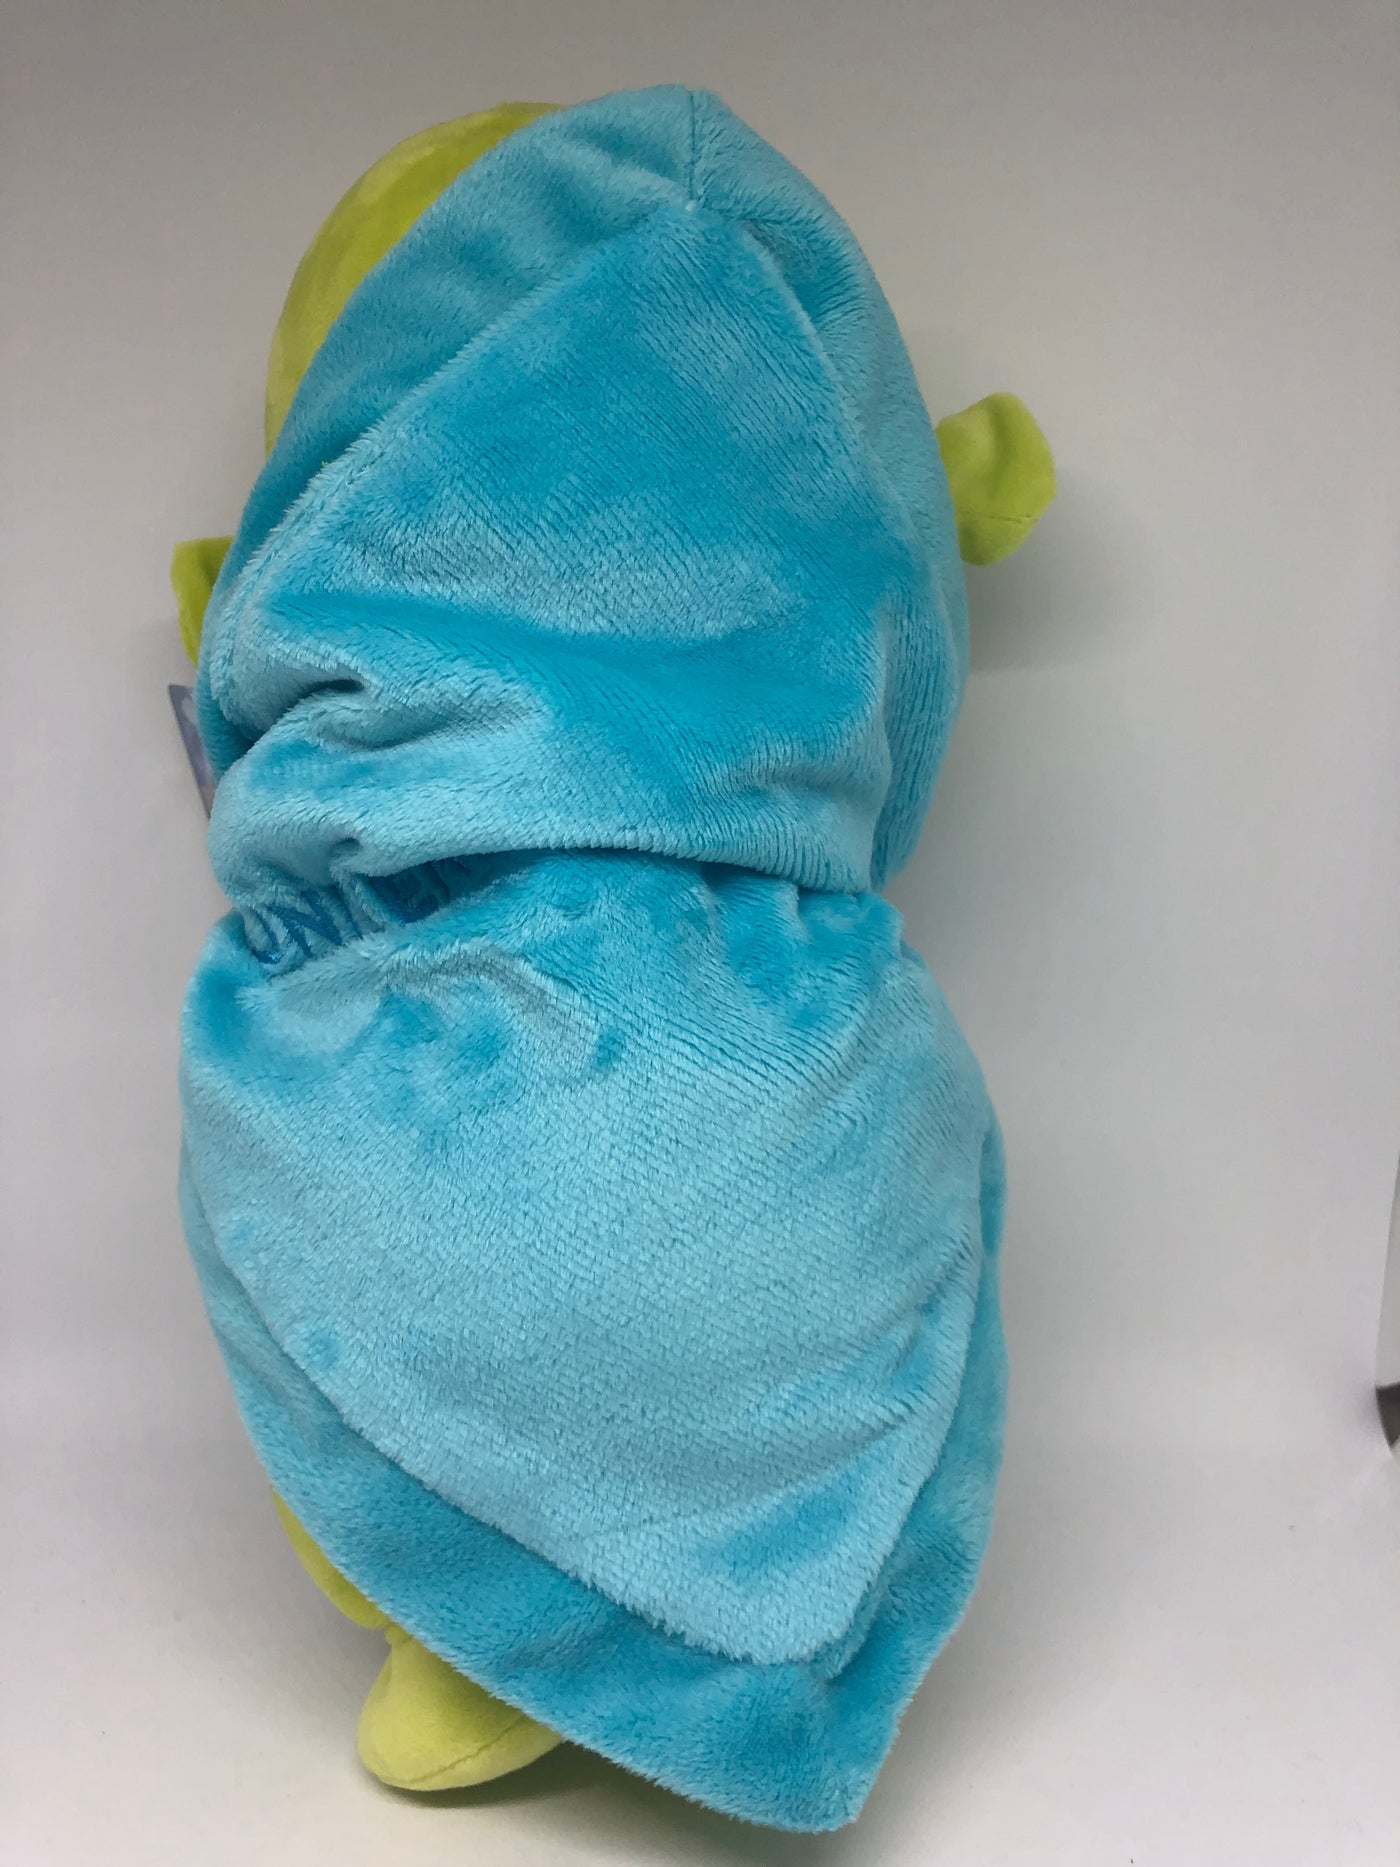 Universal Studios Shrek 4-D Baby Boy in Blanket Plush New With Tags